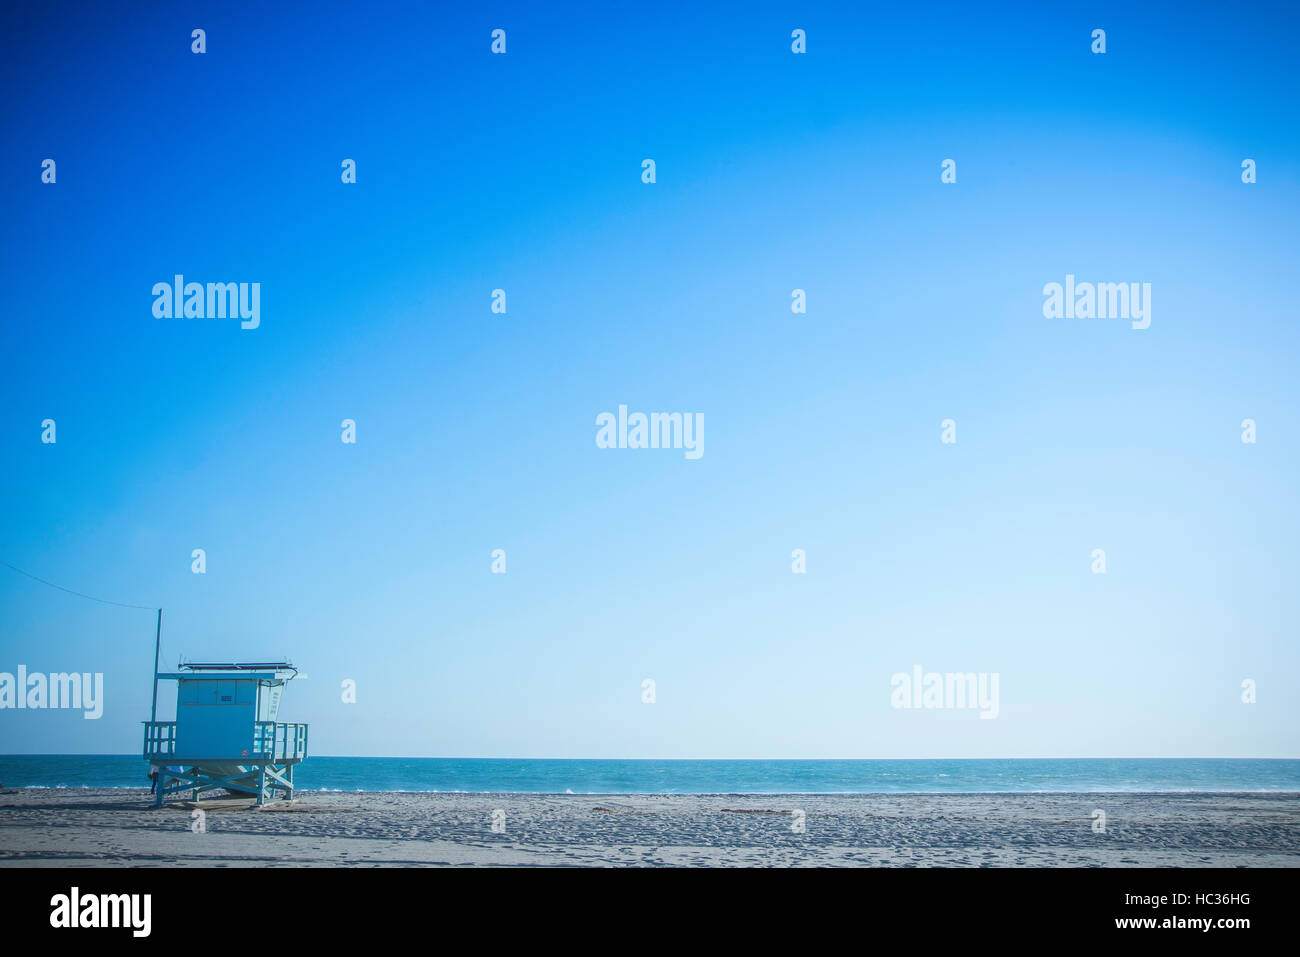 Santa Monica beach taken with a minimalism approach with a peaceful morning atmosphere. Stock Photo